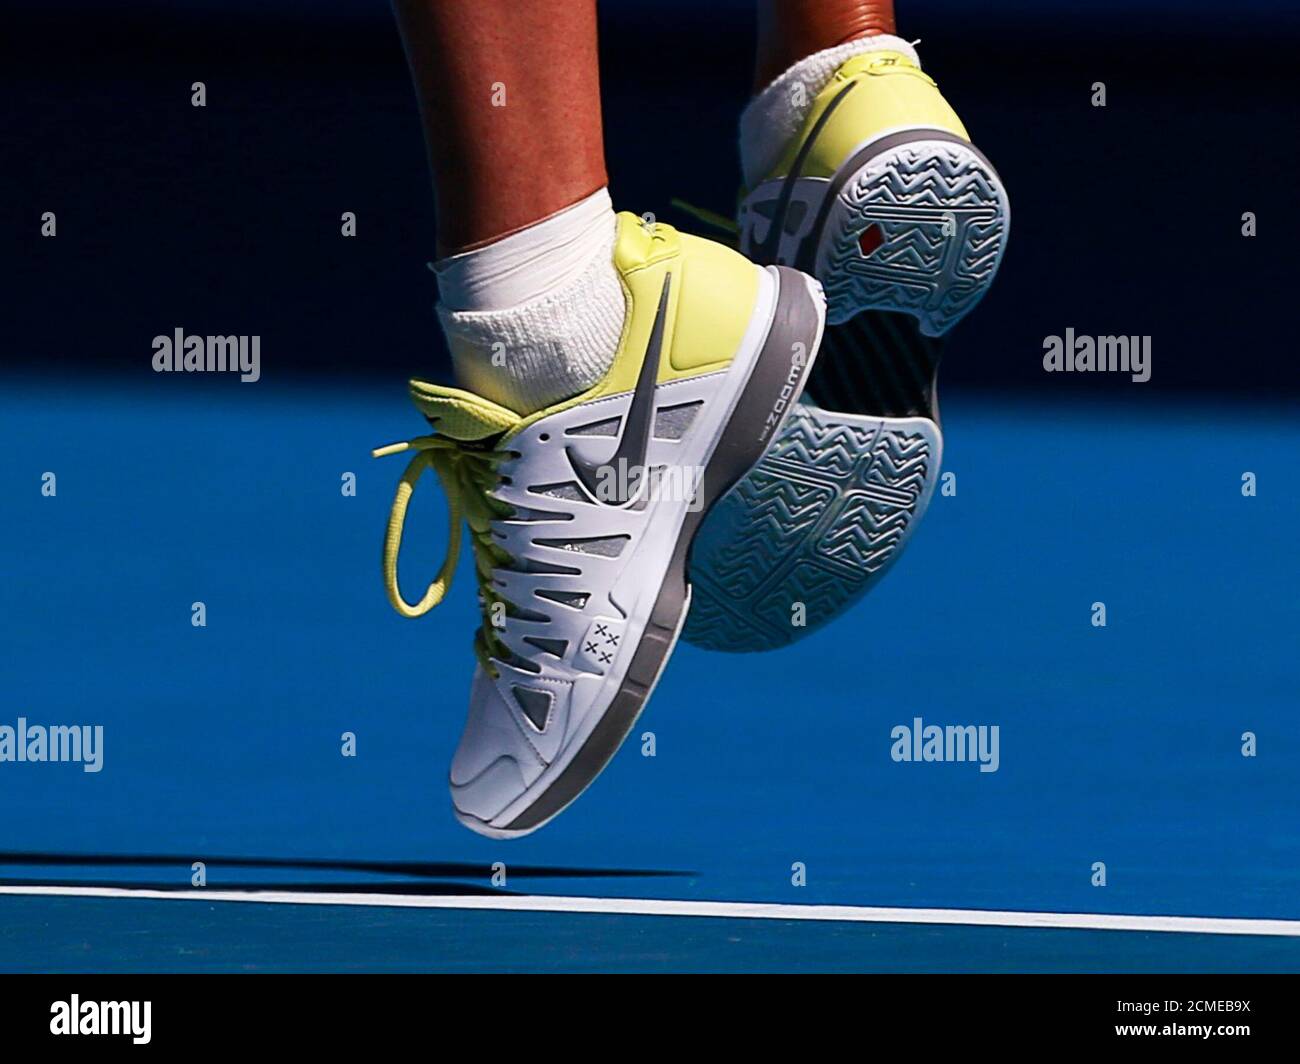 The shoes of Maria Sharapova of Russia are seen as she serves to Kirsten  Flipkens of Belgium during their women's singles match at the Australian  Open tennis tournament in Melbourne, January 20,